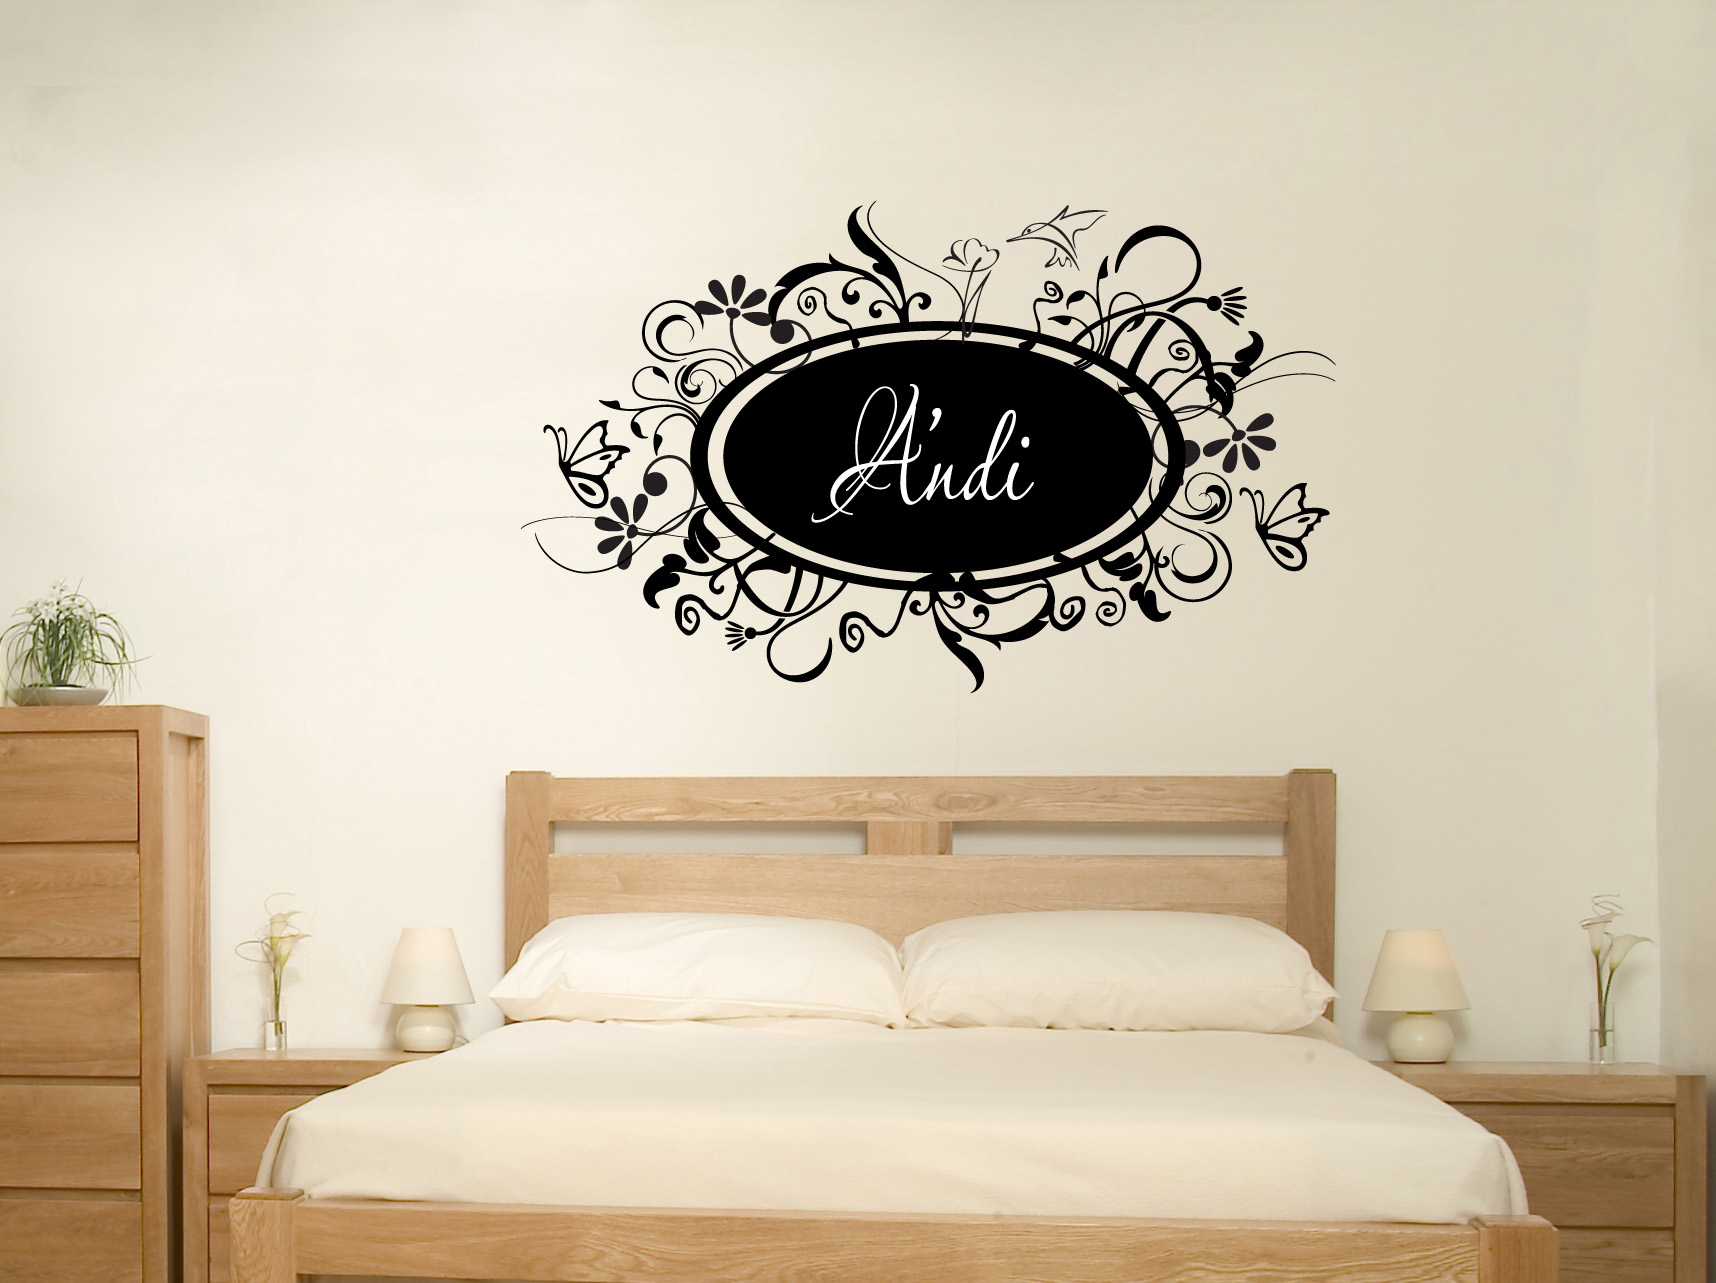 Passions Conflict Name Frame Wall Decal